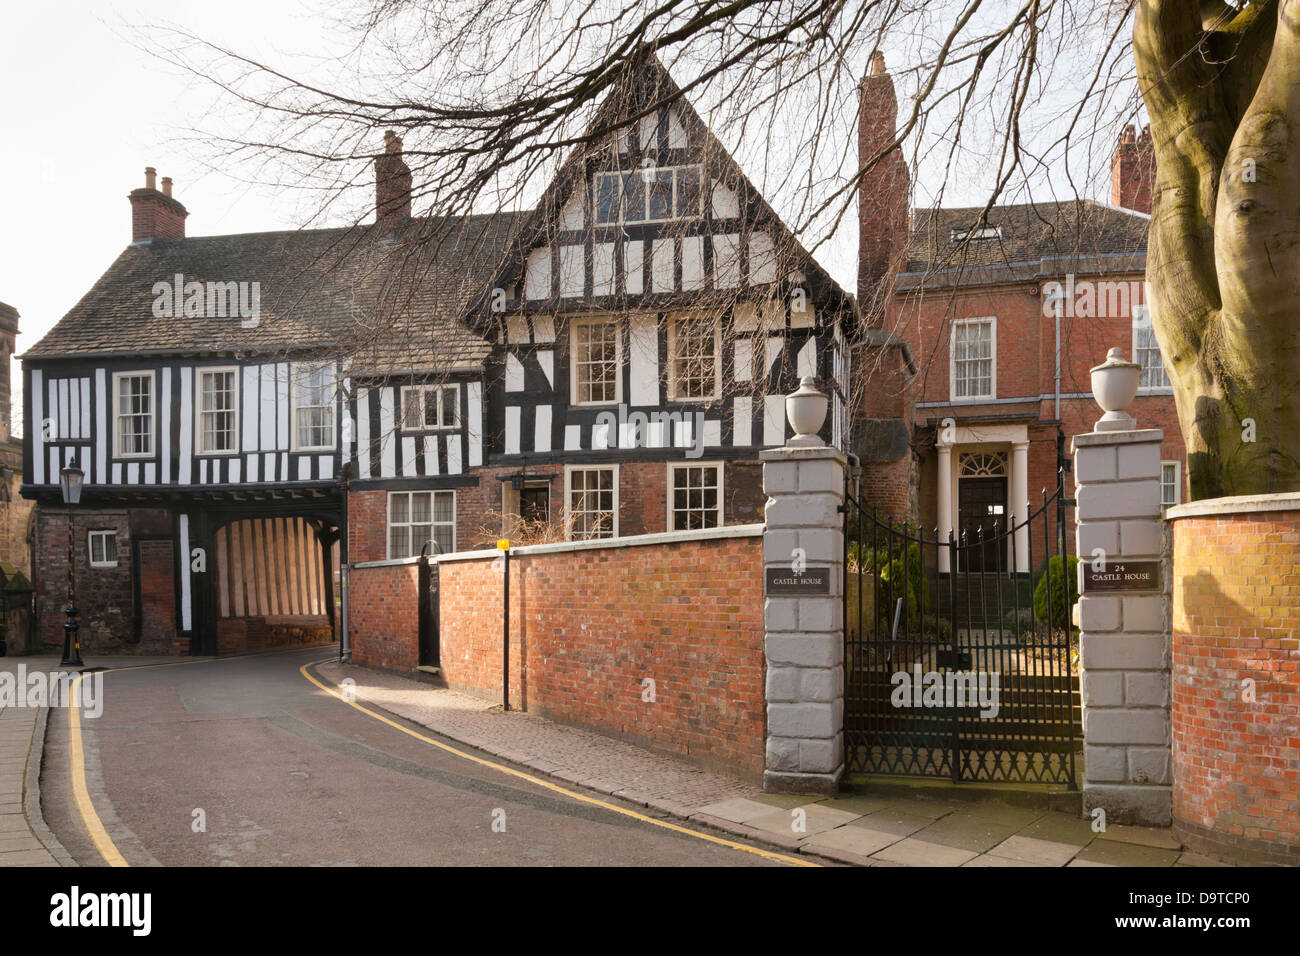 Castle House, Leicester, UK. Two Medieval half timbered buildings with a road passing underneath, and one Georgian building, now joined together. Stock Photo